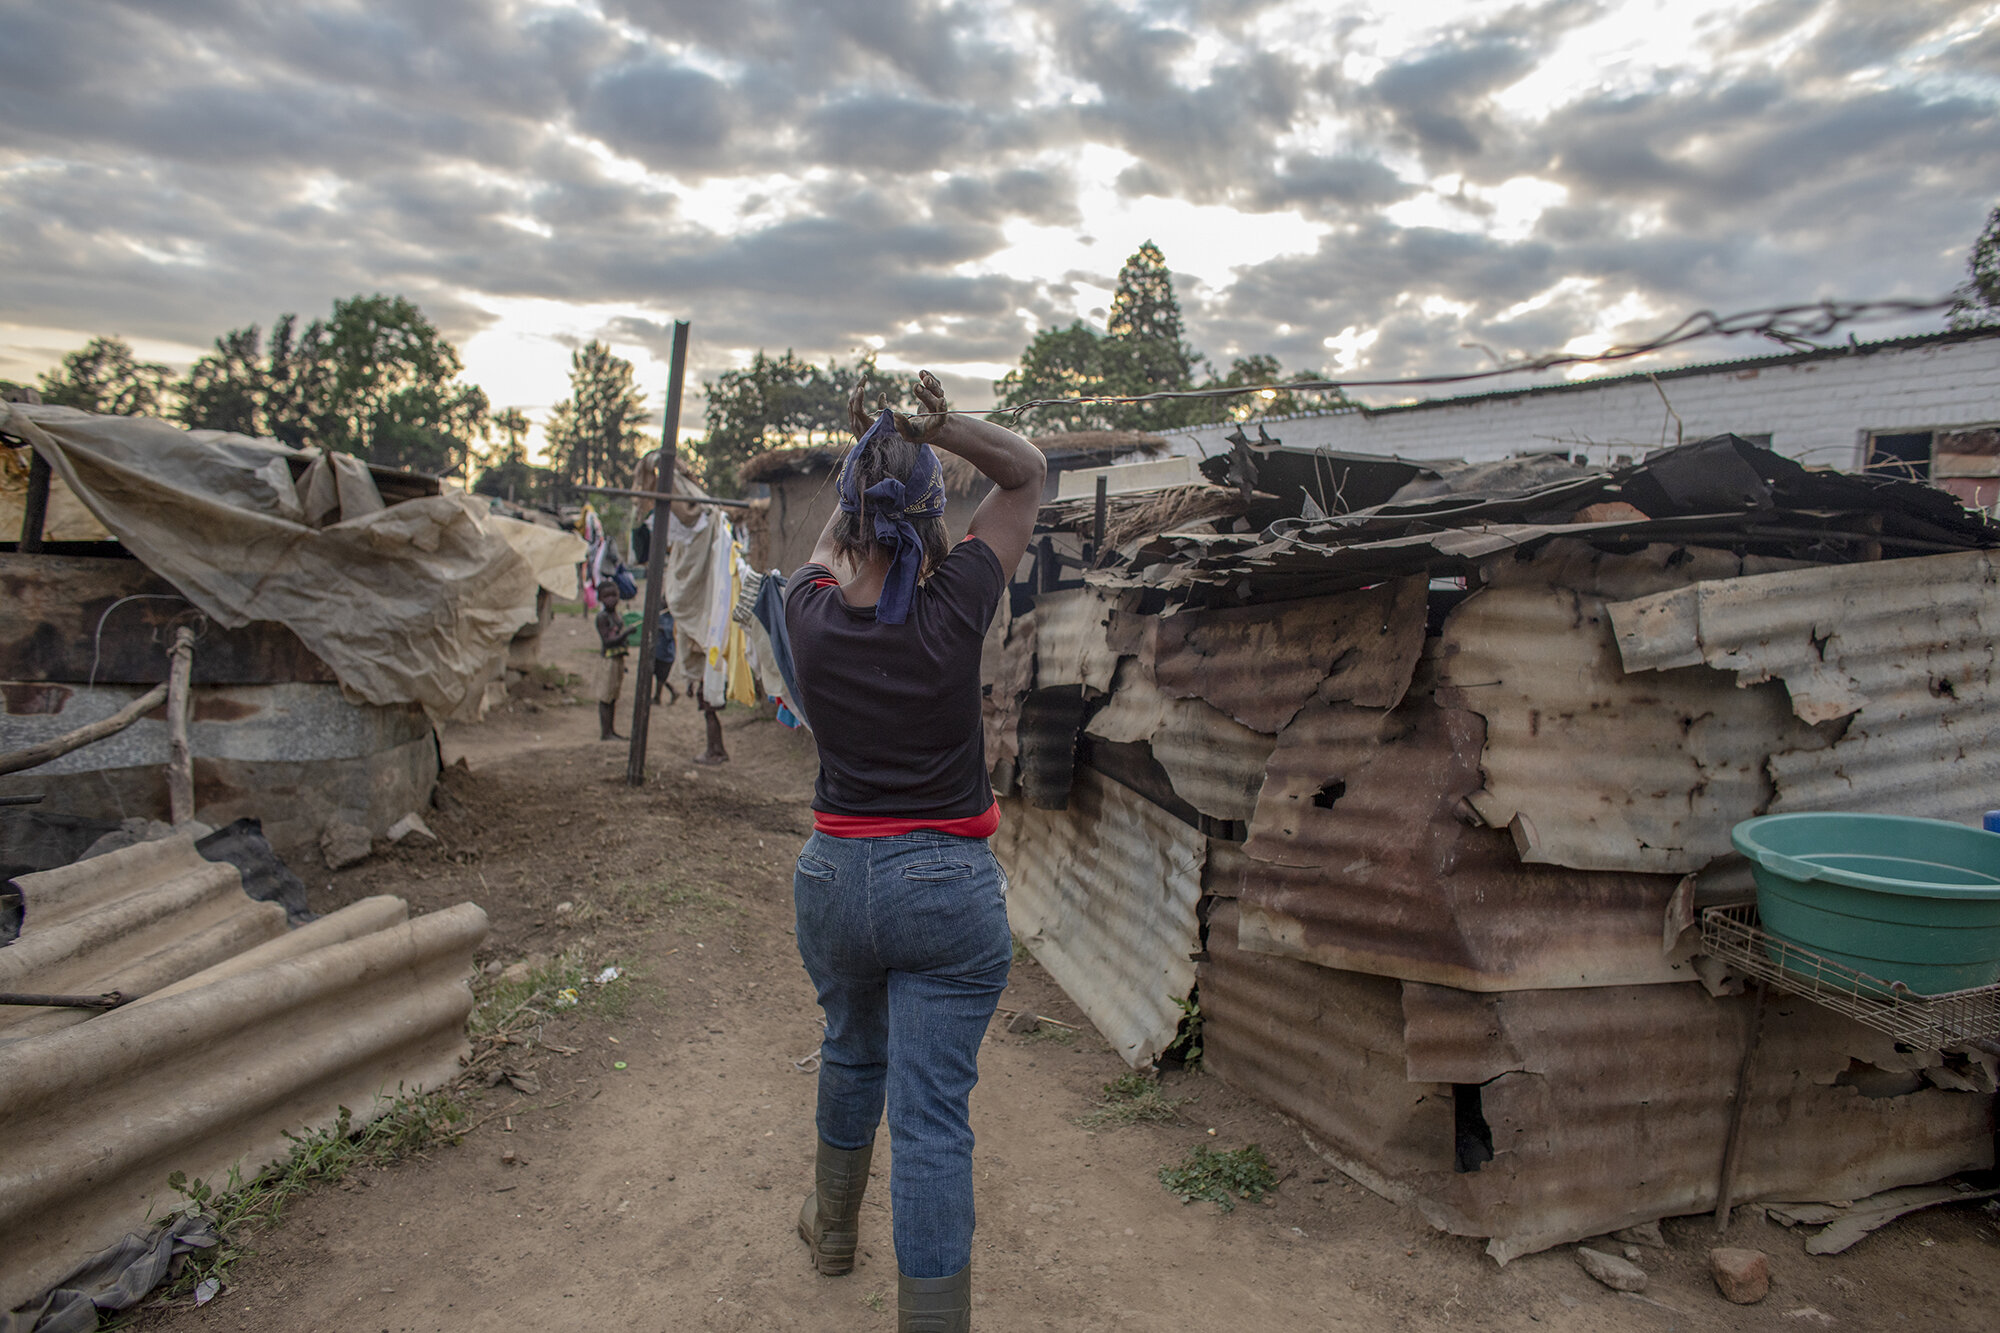  October 21, 2018: Roselyn walks back to work from her home on the farm compound after checking on her children during her dinner break. 